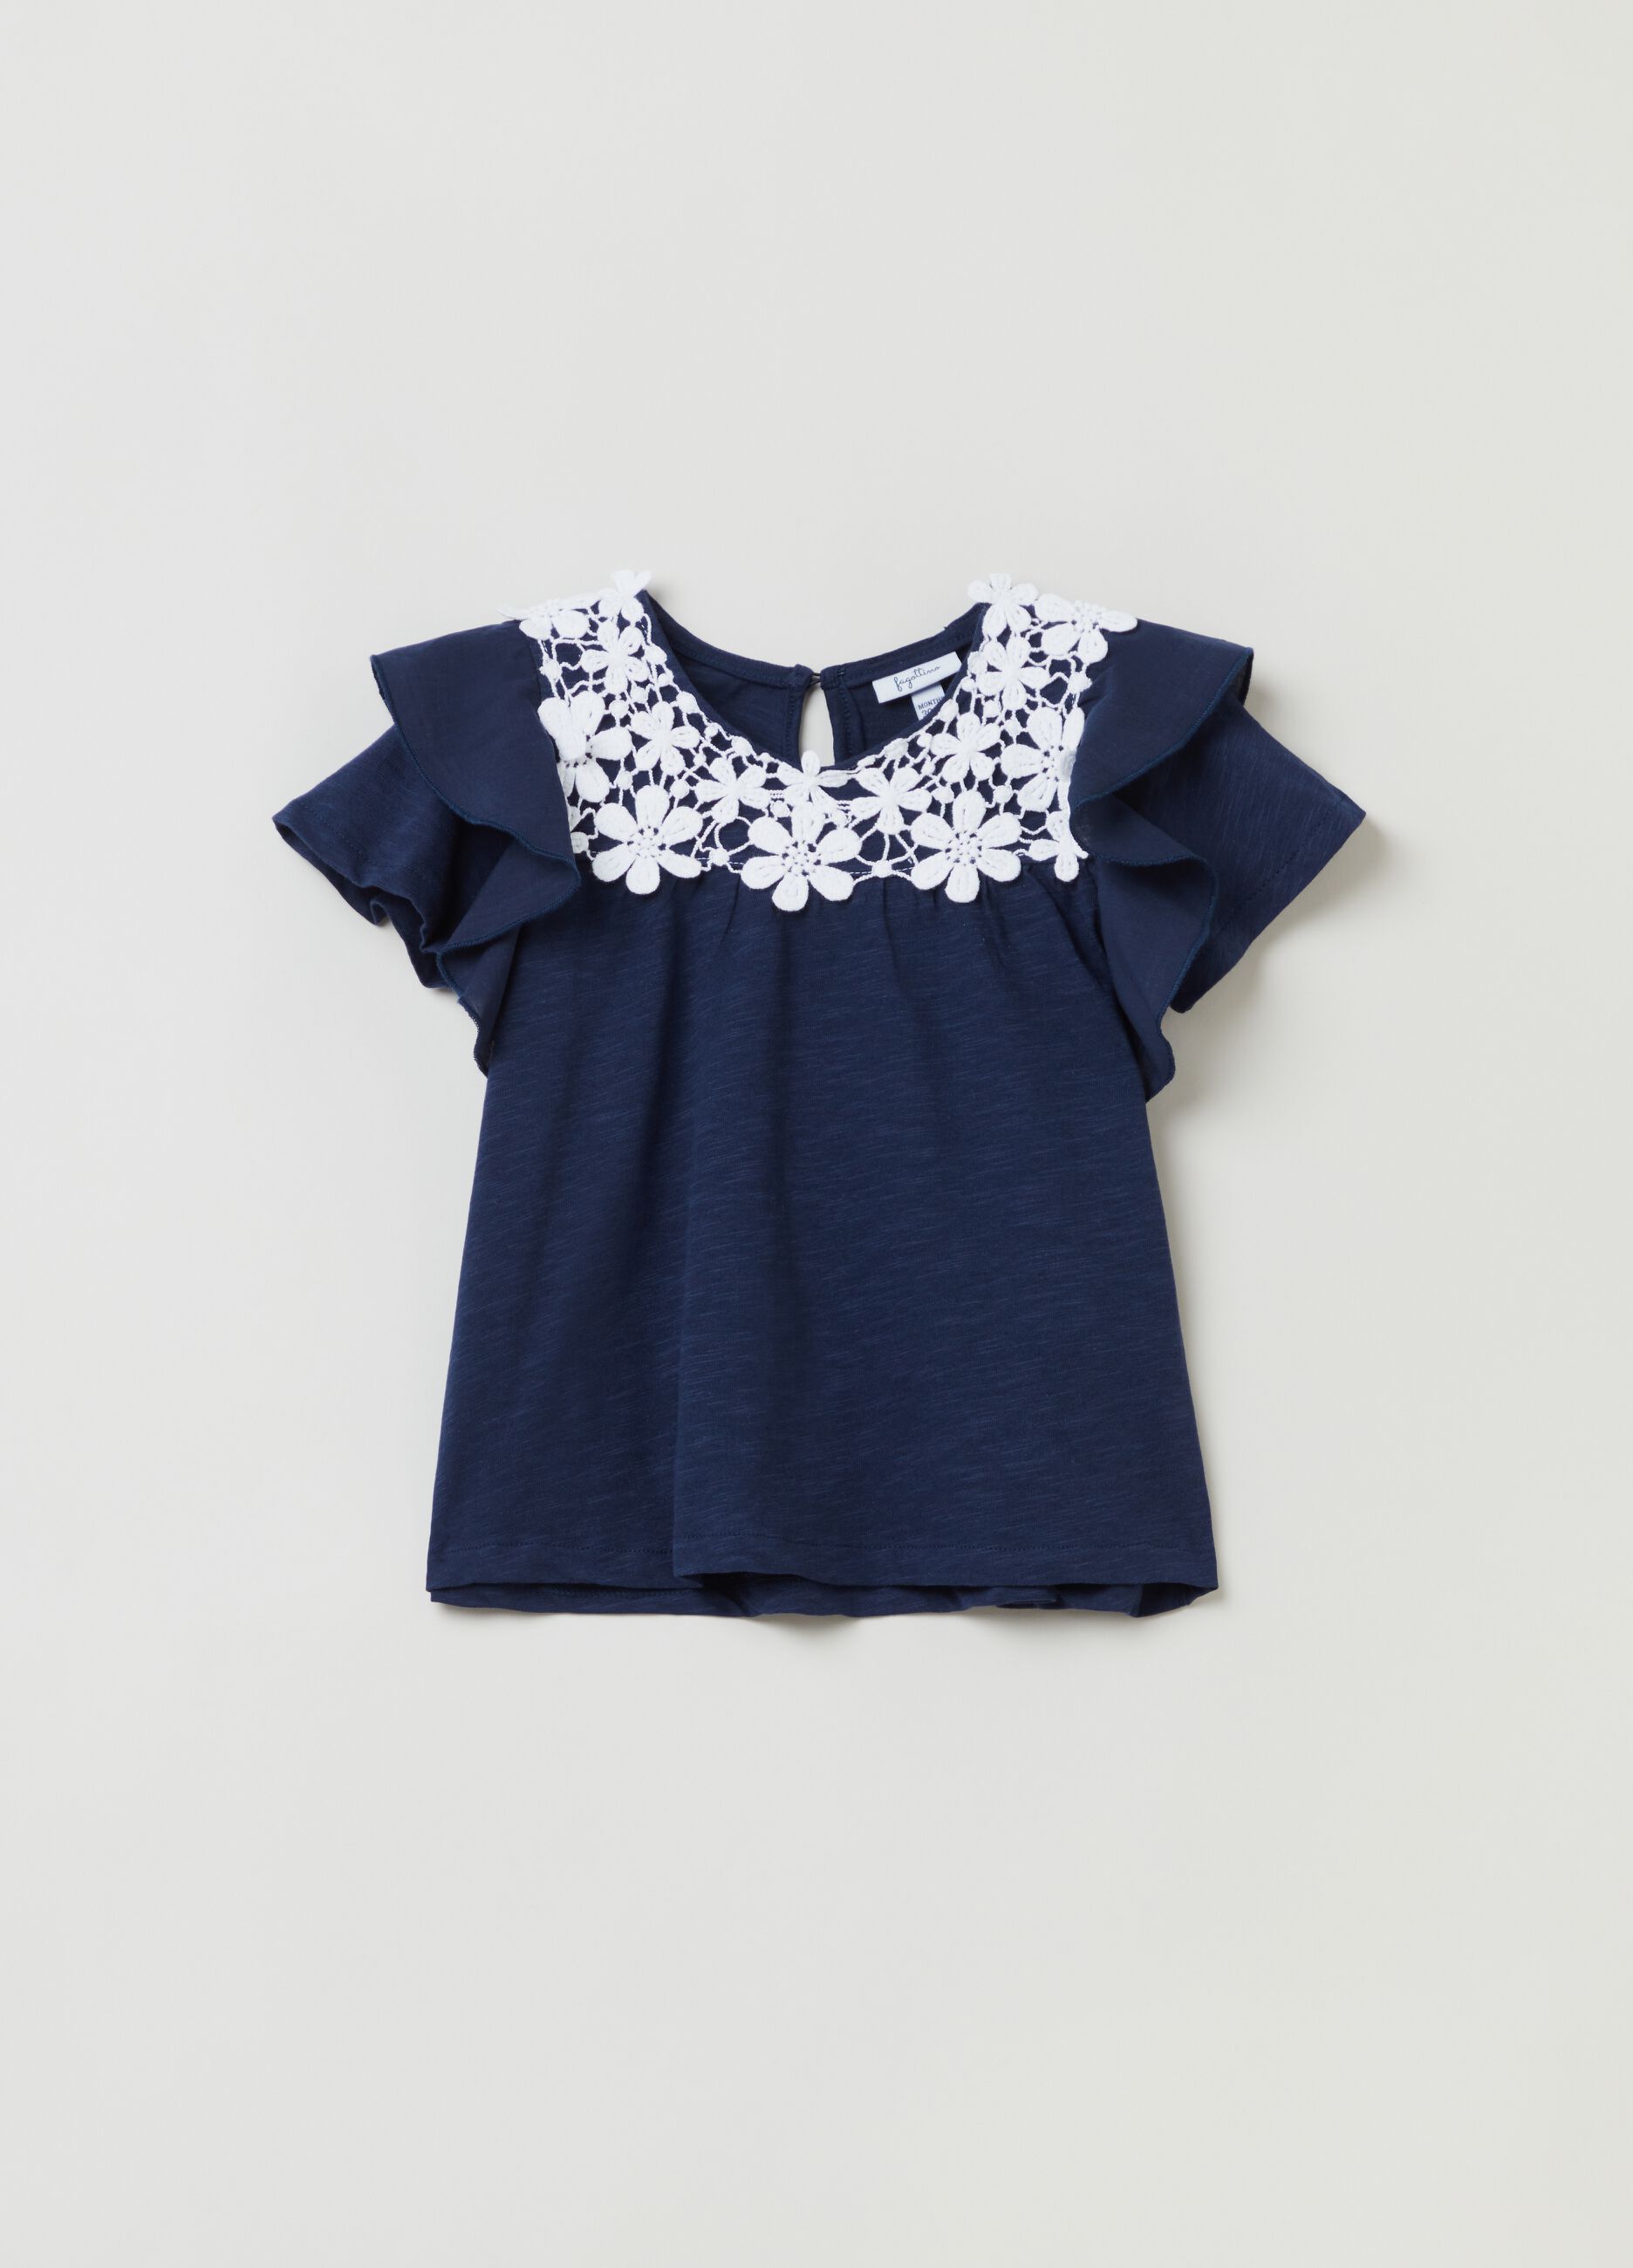 T-shirt with floral crochet application